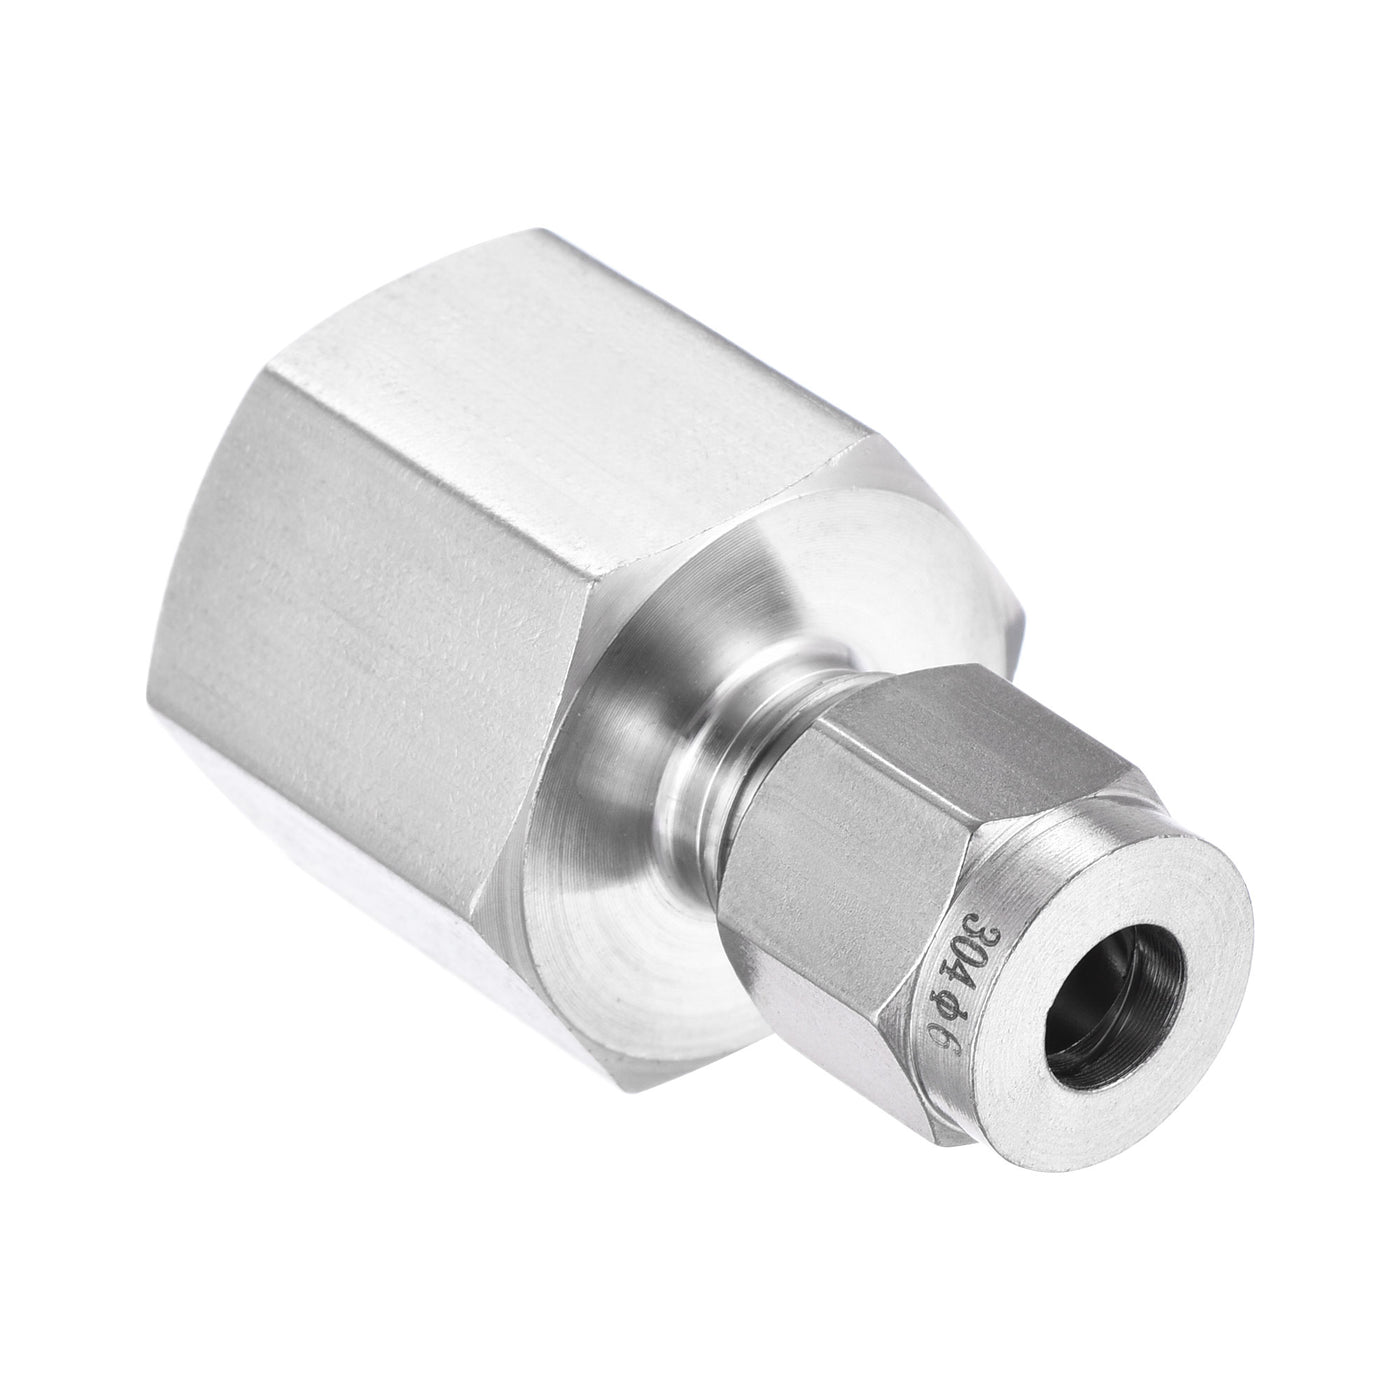 uxcell Uxcell Compression Tube Fitting 1/2NPT Female Thread x 6mm Tube OD Straight Coupling Adapter 304 Stainless Steel